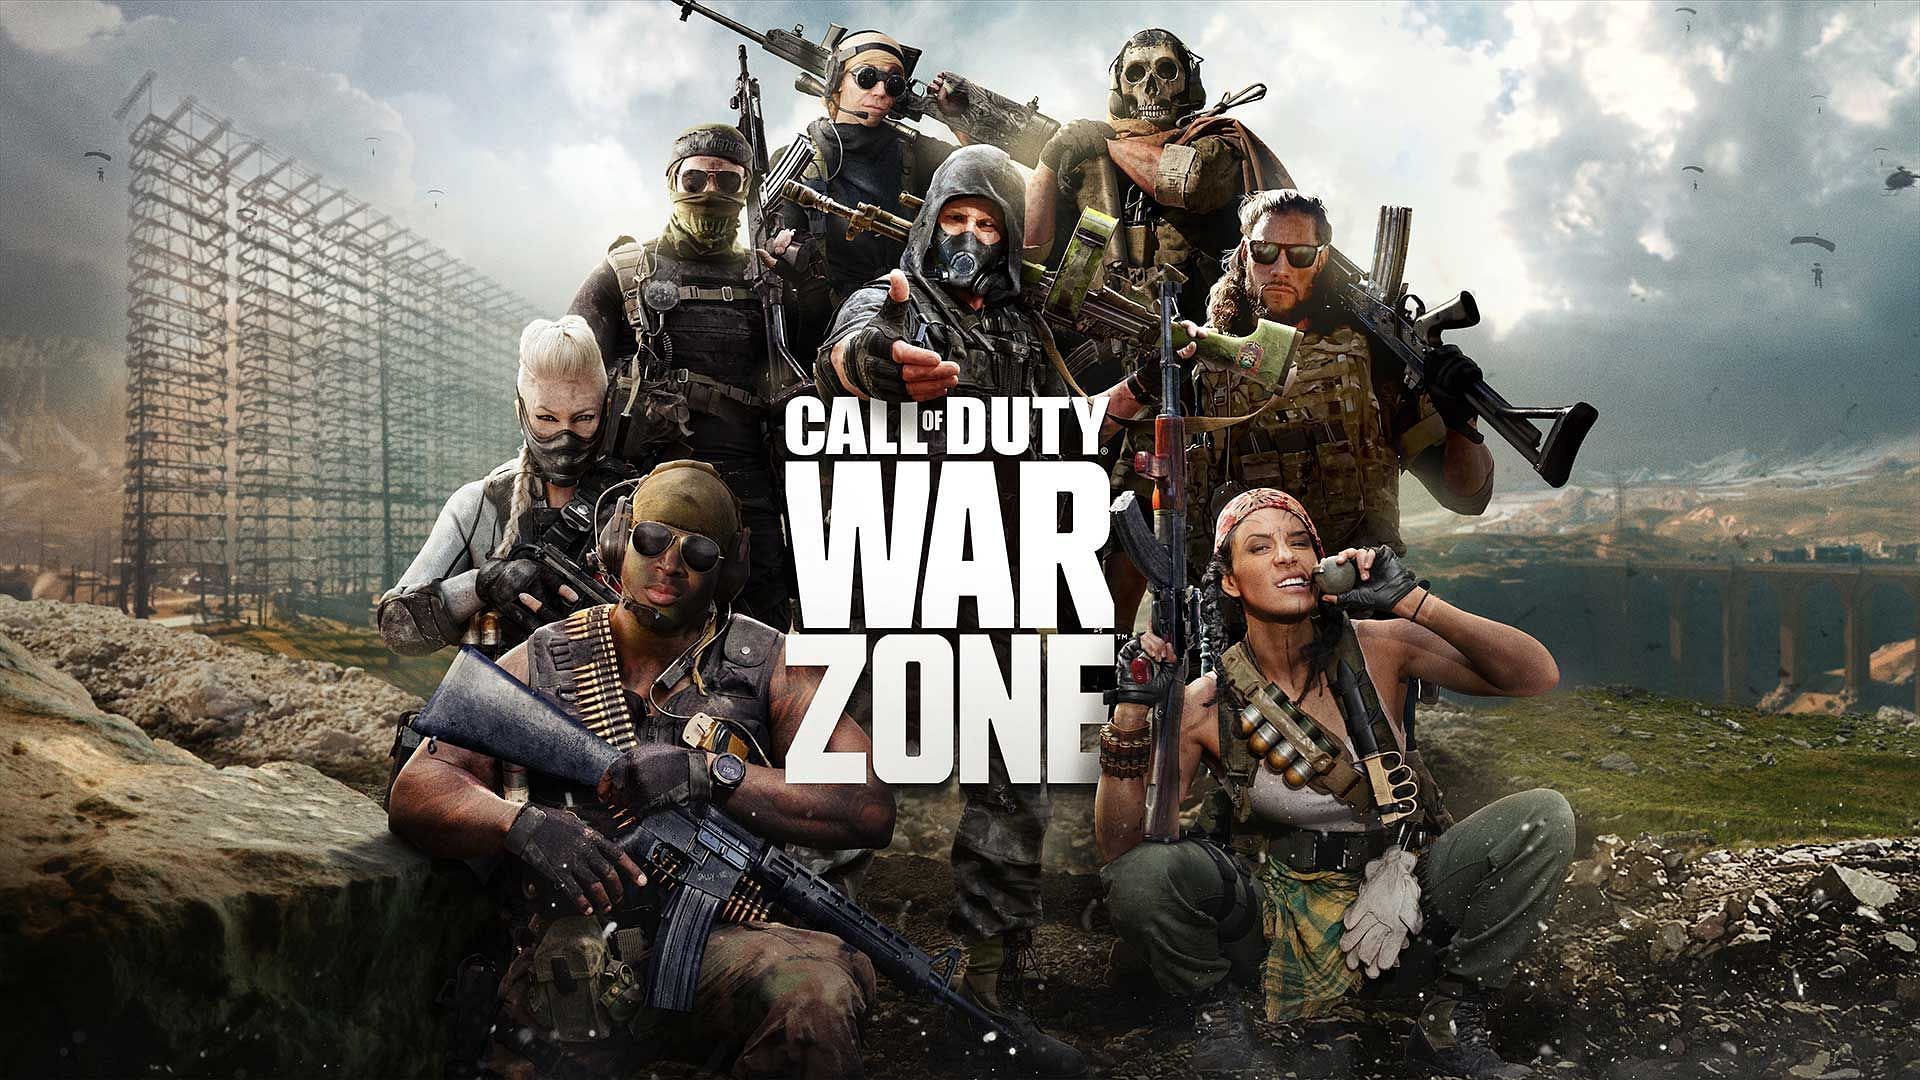 Official artwork for COD Warzone (Image via Activision Publishing)